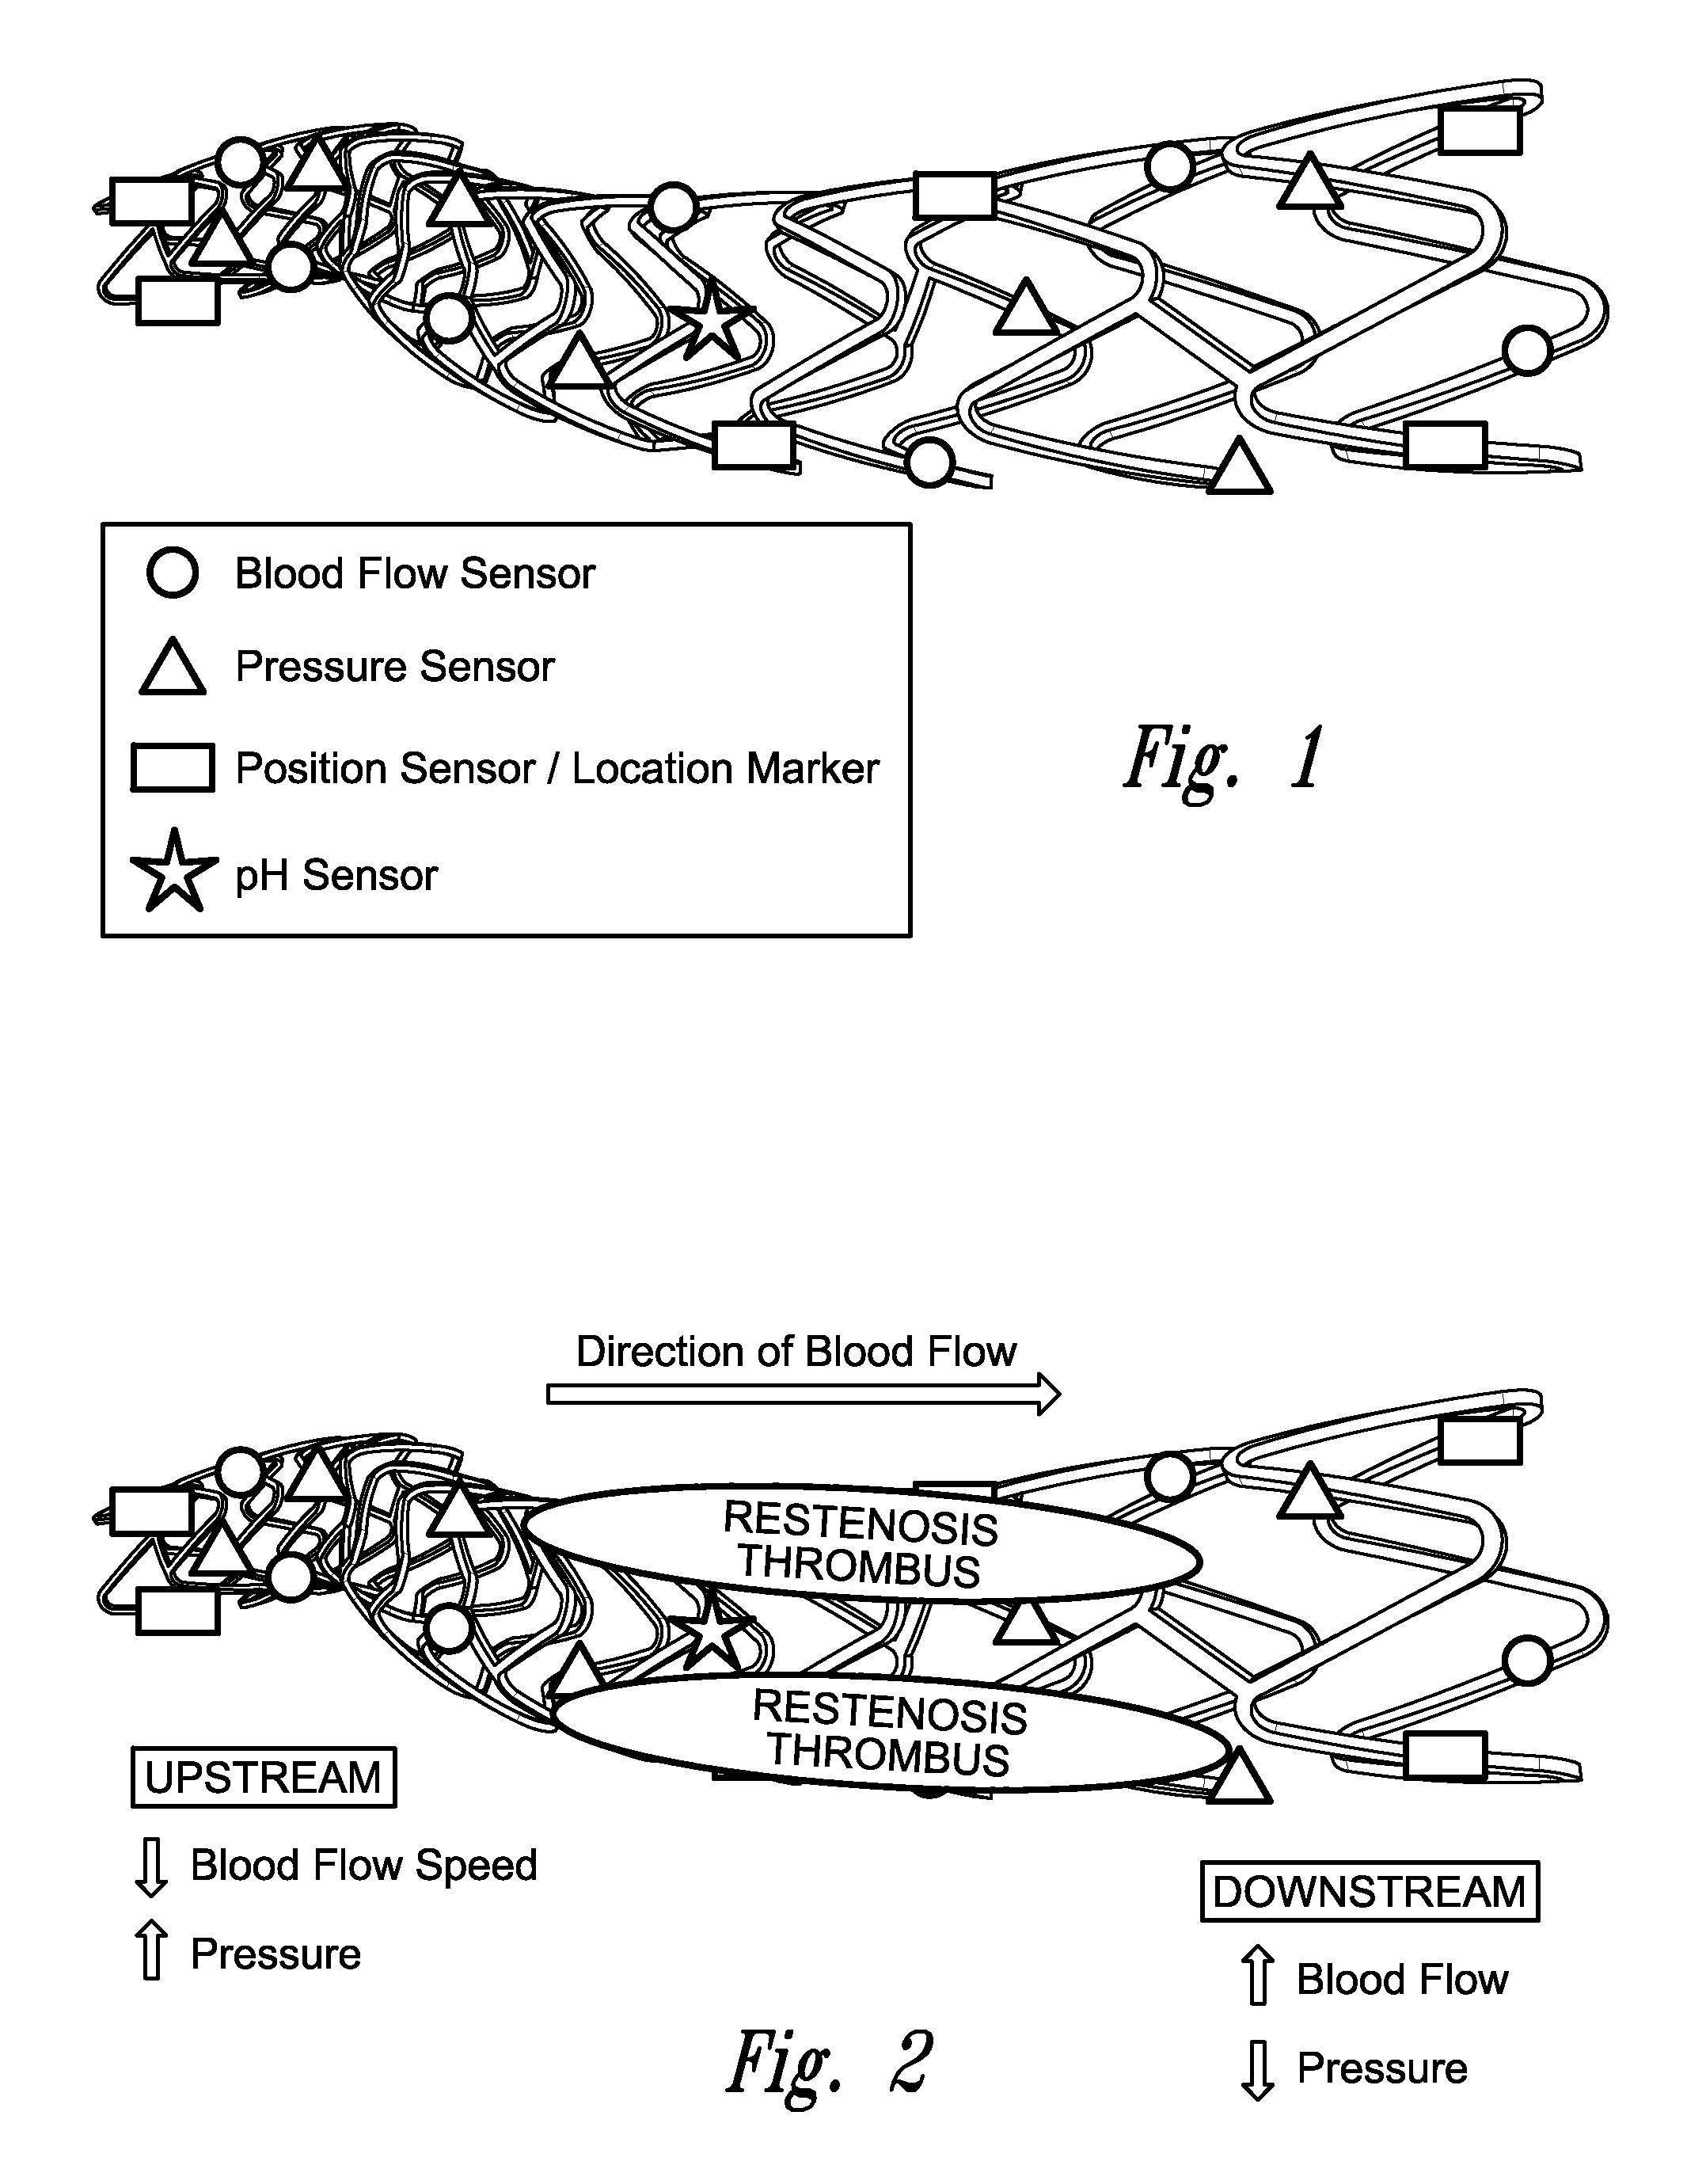 Stent monitoring assembly and method of use thereof